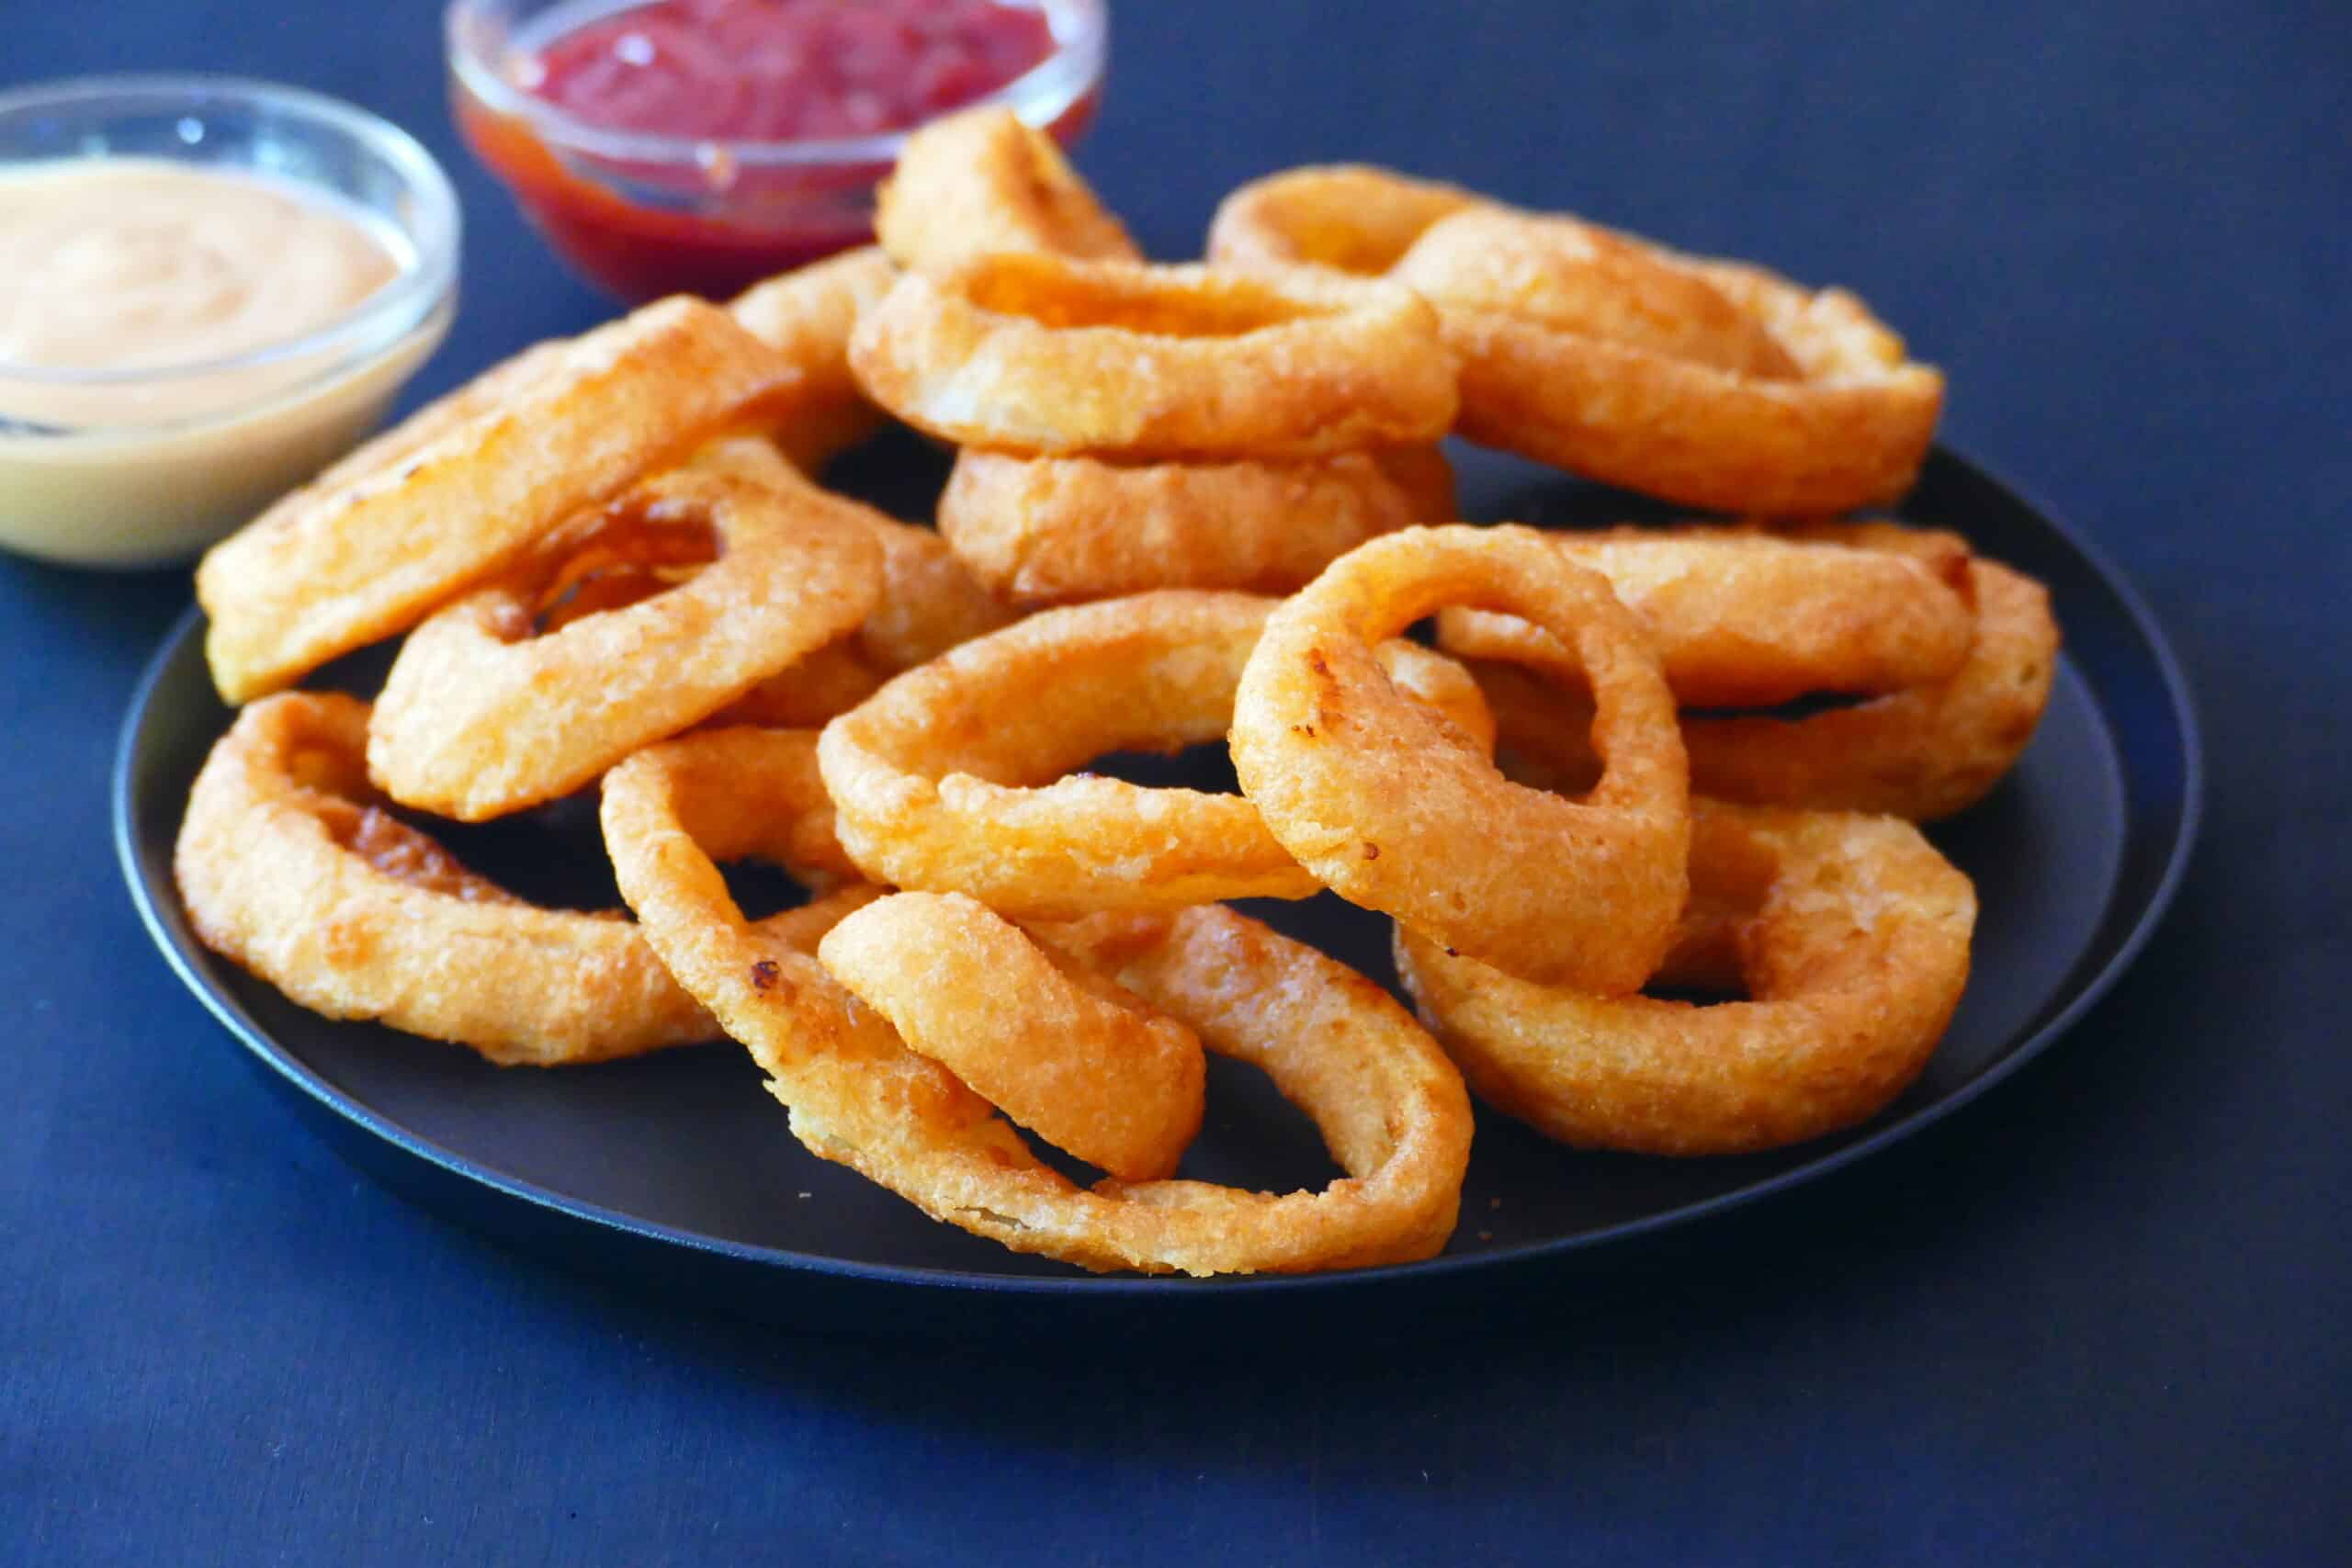 Onion rings on a black plate with red and white sauces in background